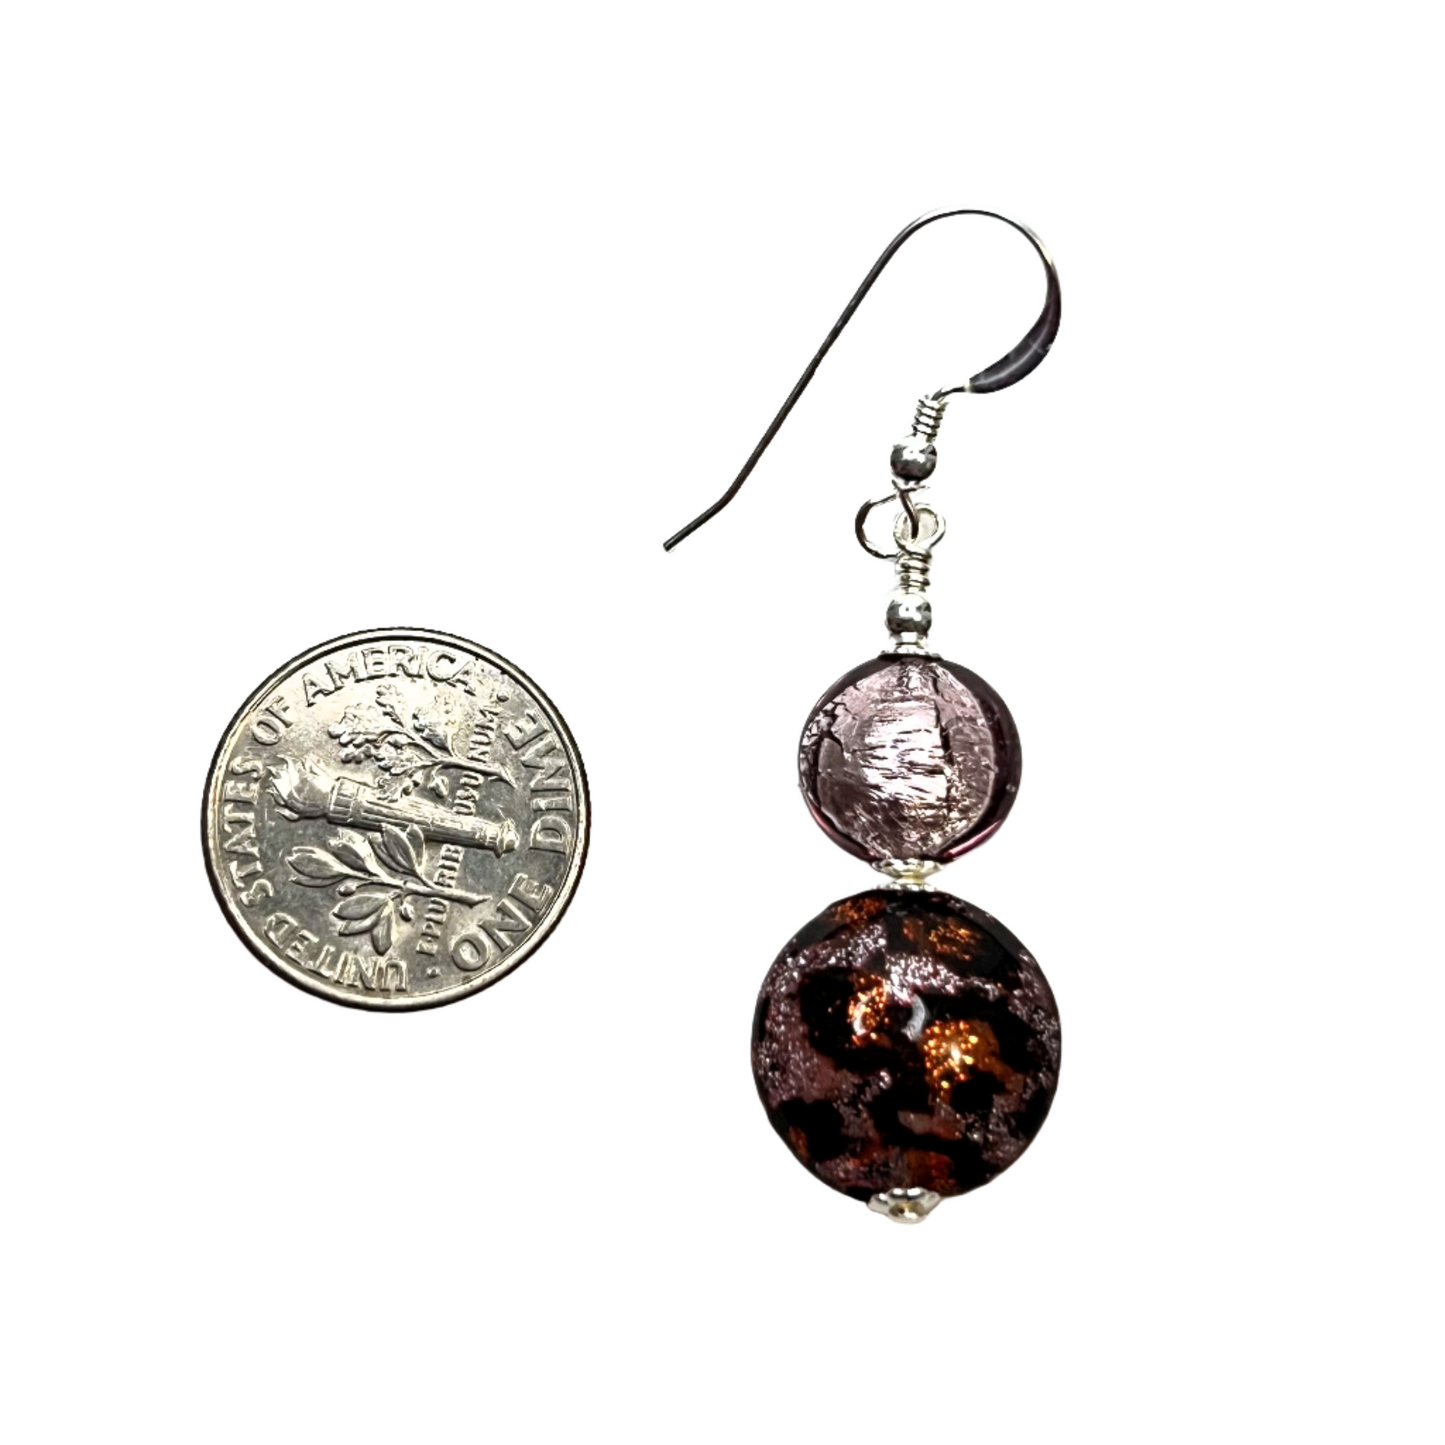 a pair of earrings sitting next to a 